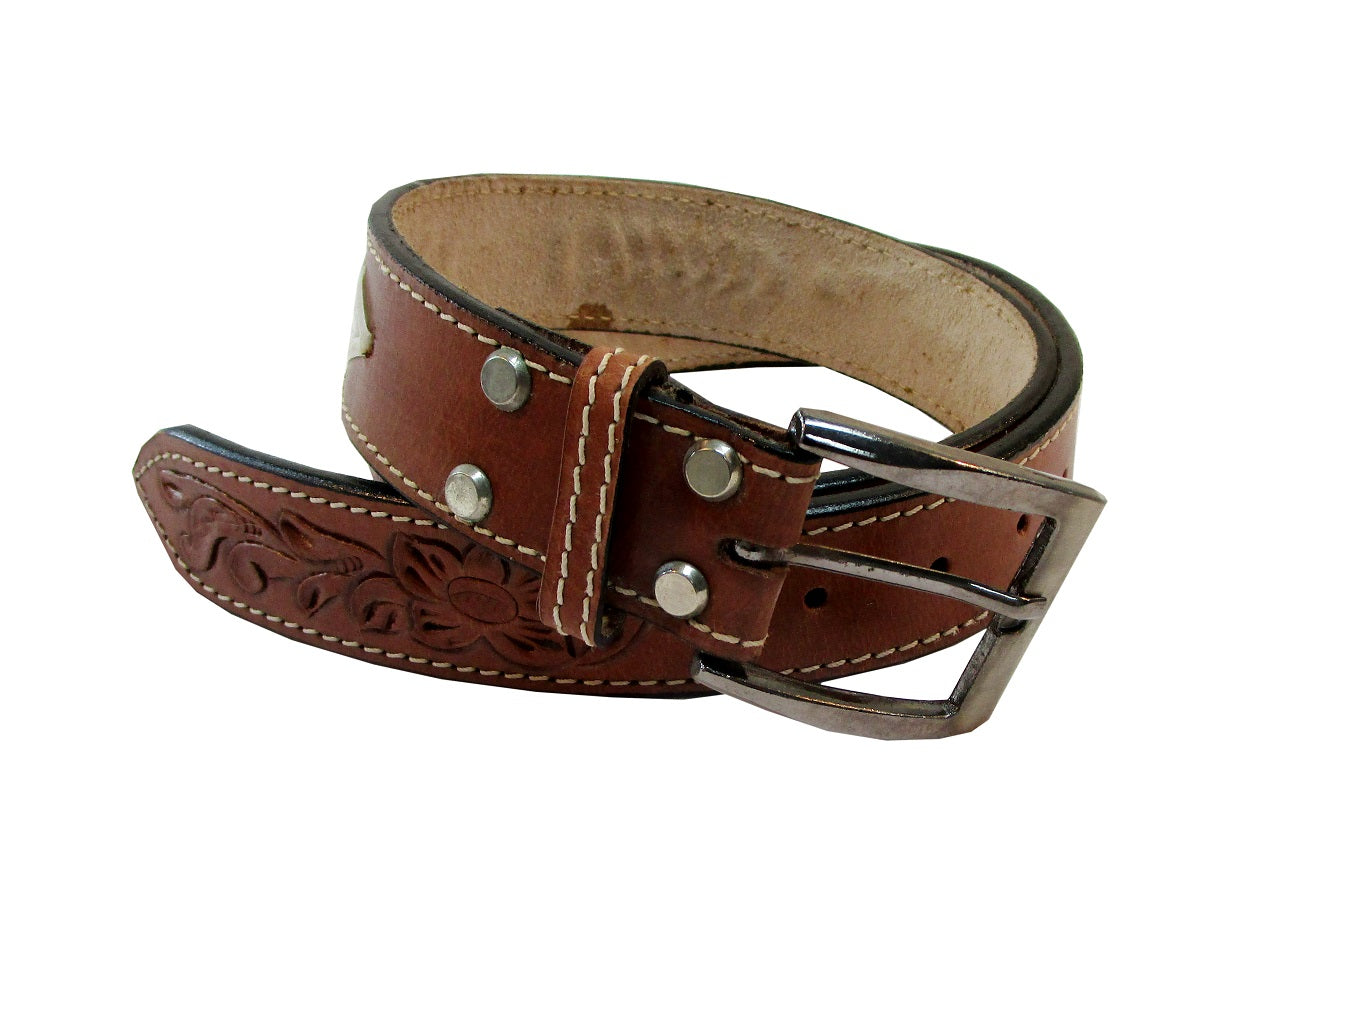 Buffalo Buckle Tooled Brown Leather Belt Removable Belt 